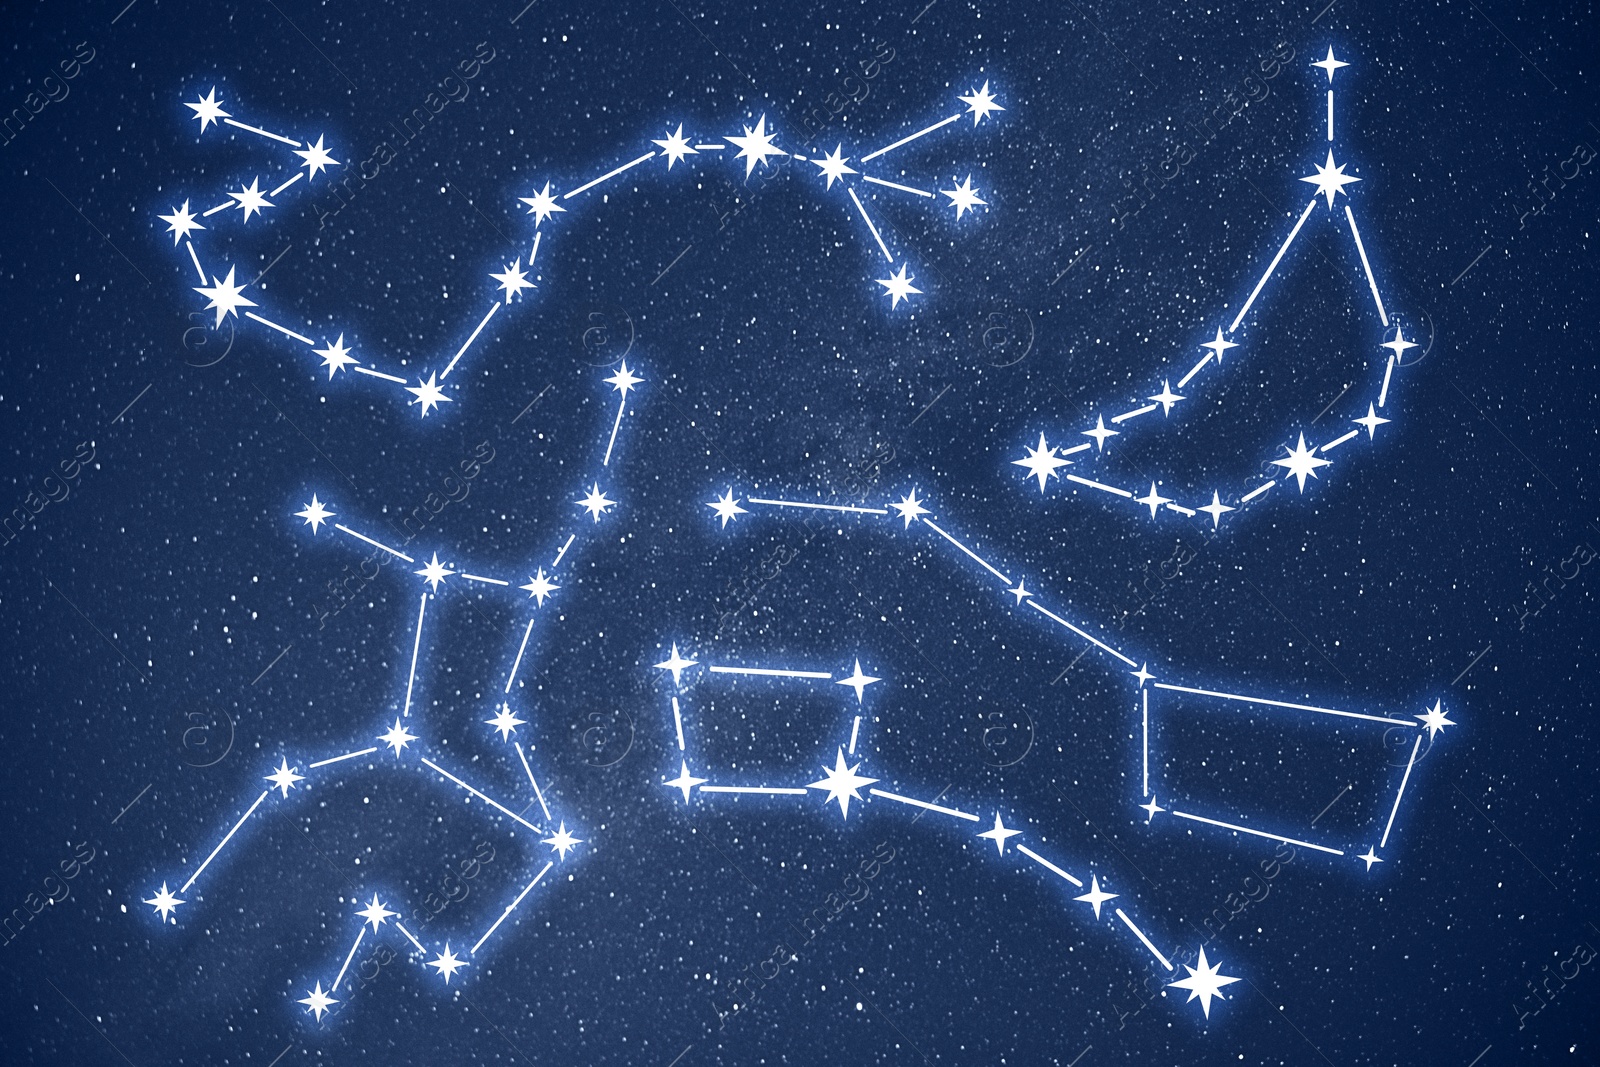 Image of Set with different constellation stick figure patterns in starry night sky